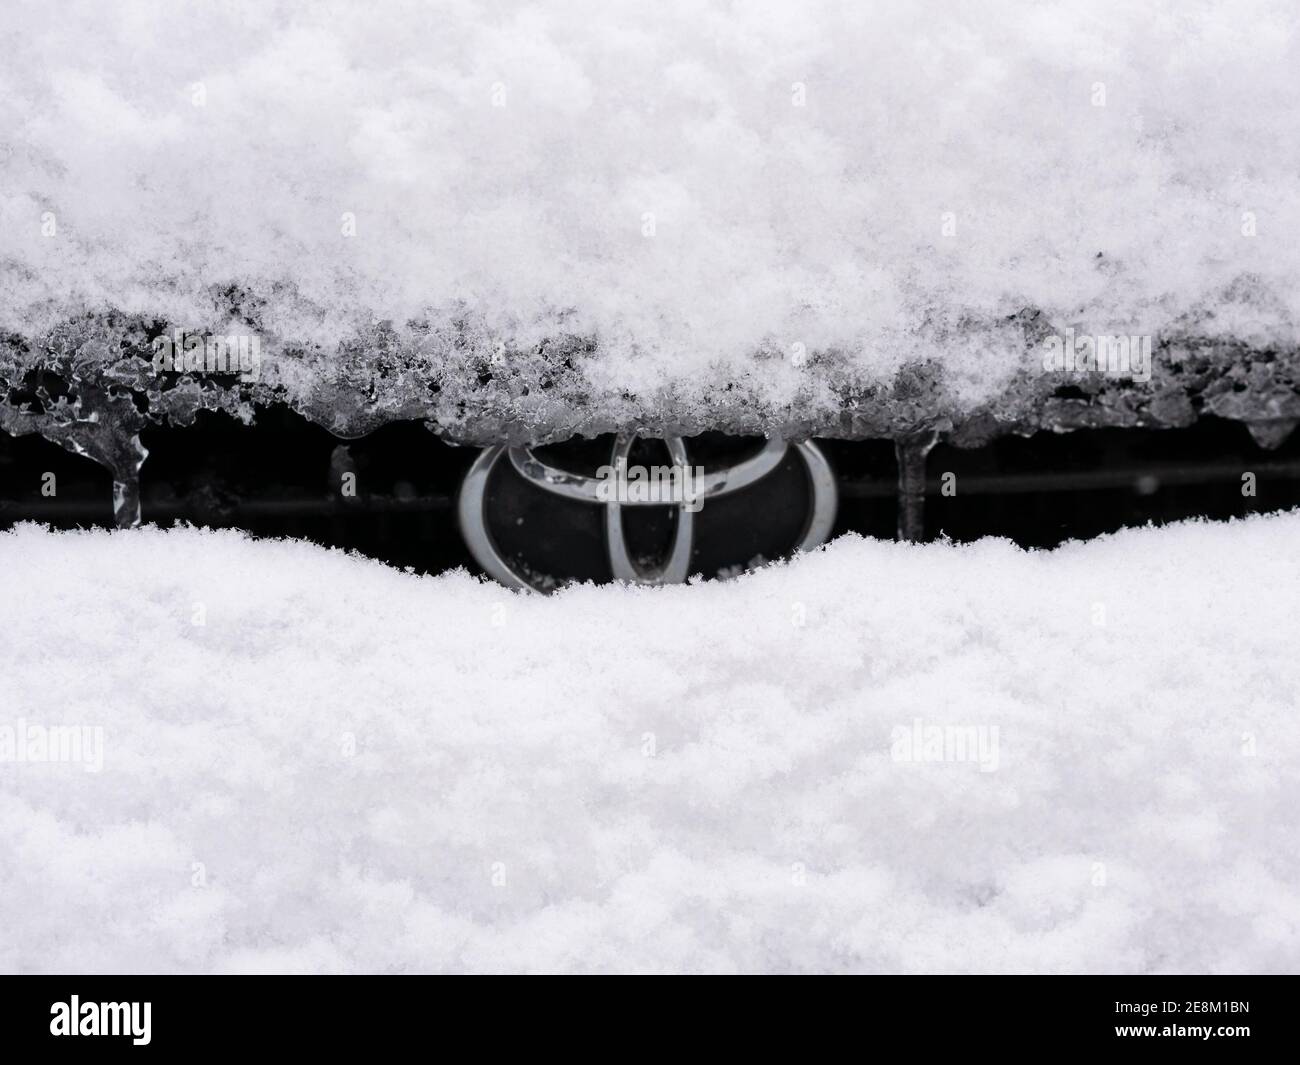 BERLIN, GERMANY - JANUARY 30, 2021: Close-up of A Snow-capped Toyota Logo On A Car In Berlin, Germany Stock Photo